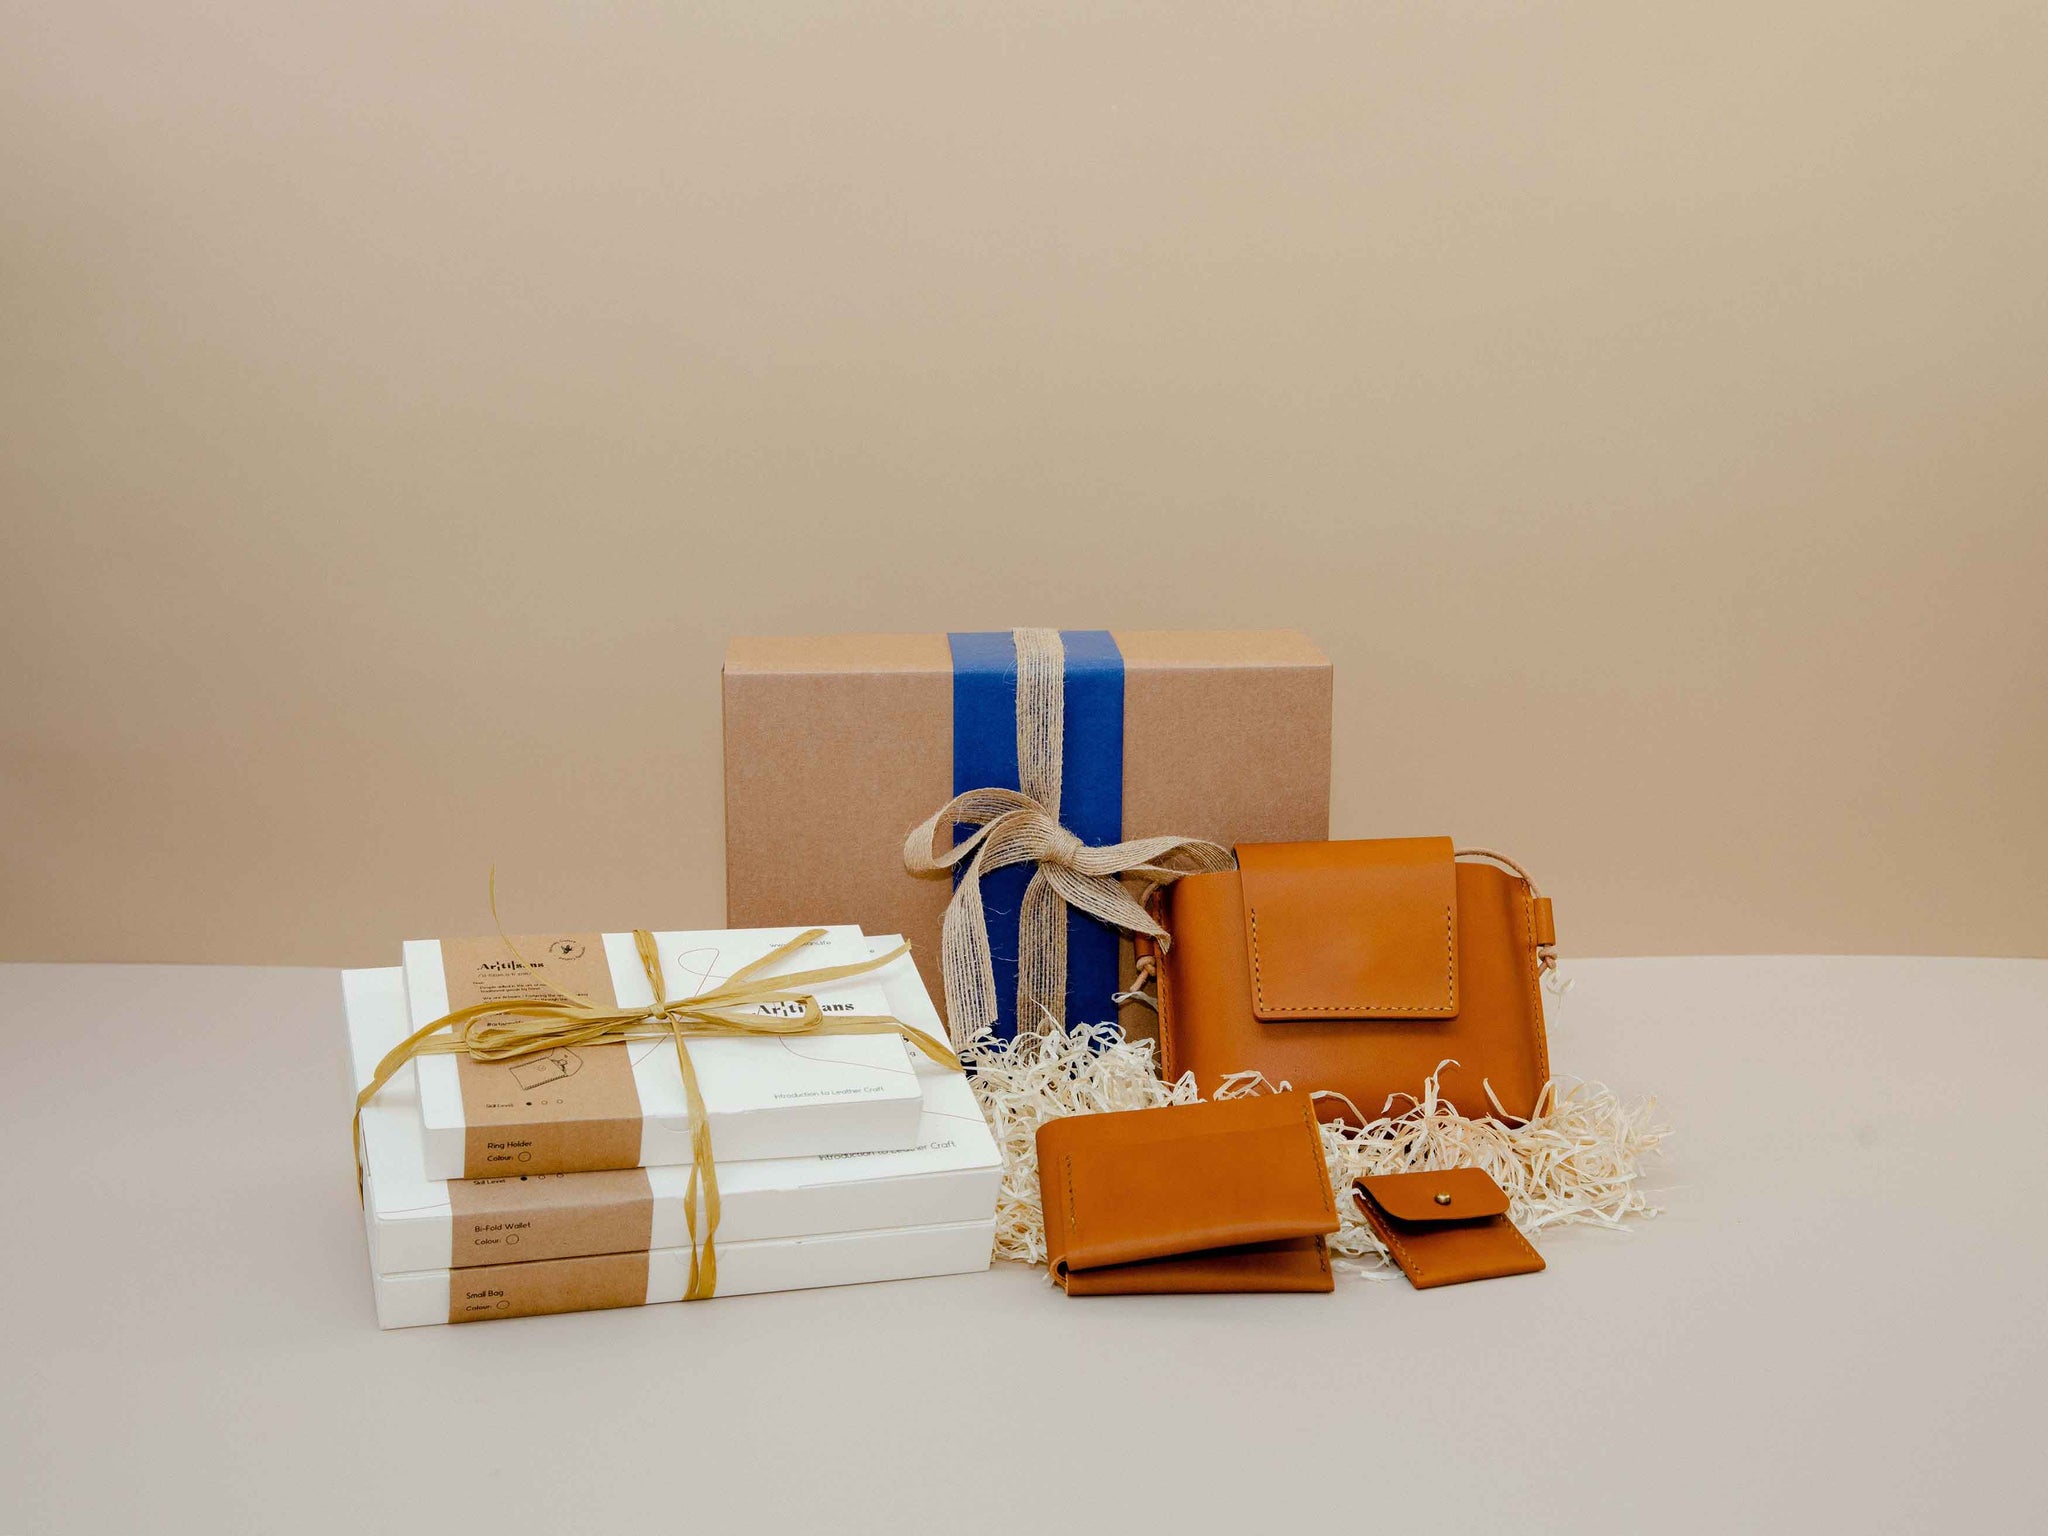 Christmas Gift bundle - D.I.Y Leather Small bag, D.I.Y Leather Bi-fold wallet, D.I.Y Leather Ring case (Includes 3 D.I.Y Leather Keyrings)